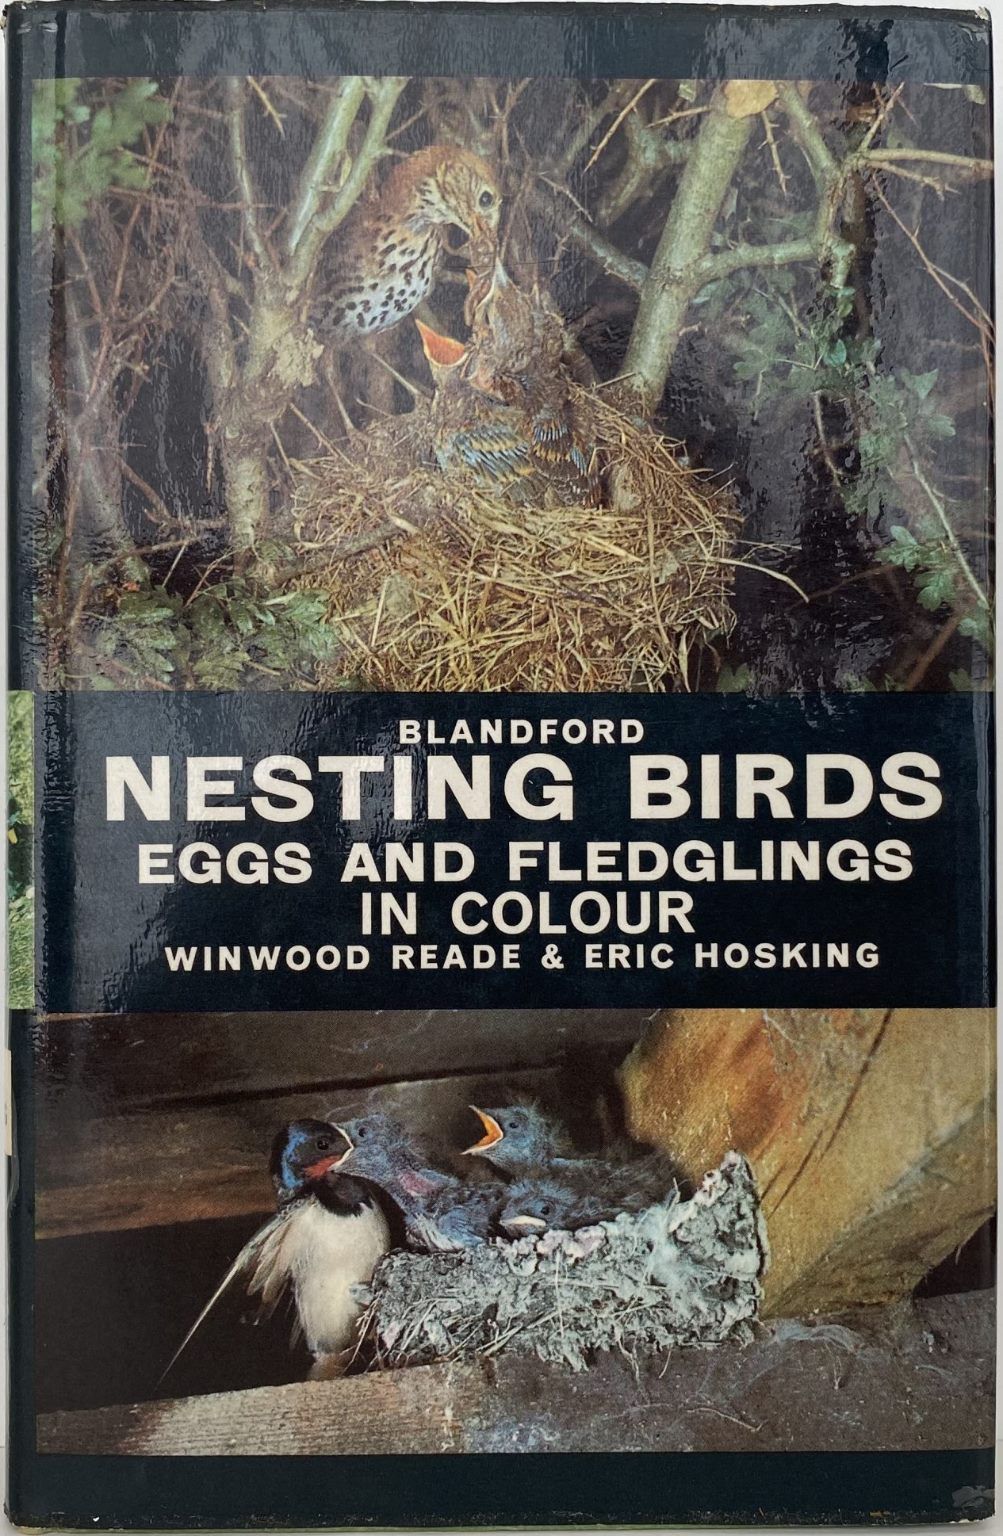 NESTING BIRDS, EGGS AND FLEDGLINGS in Colour